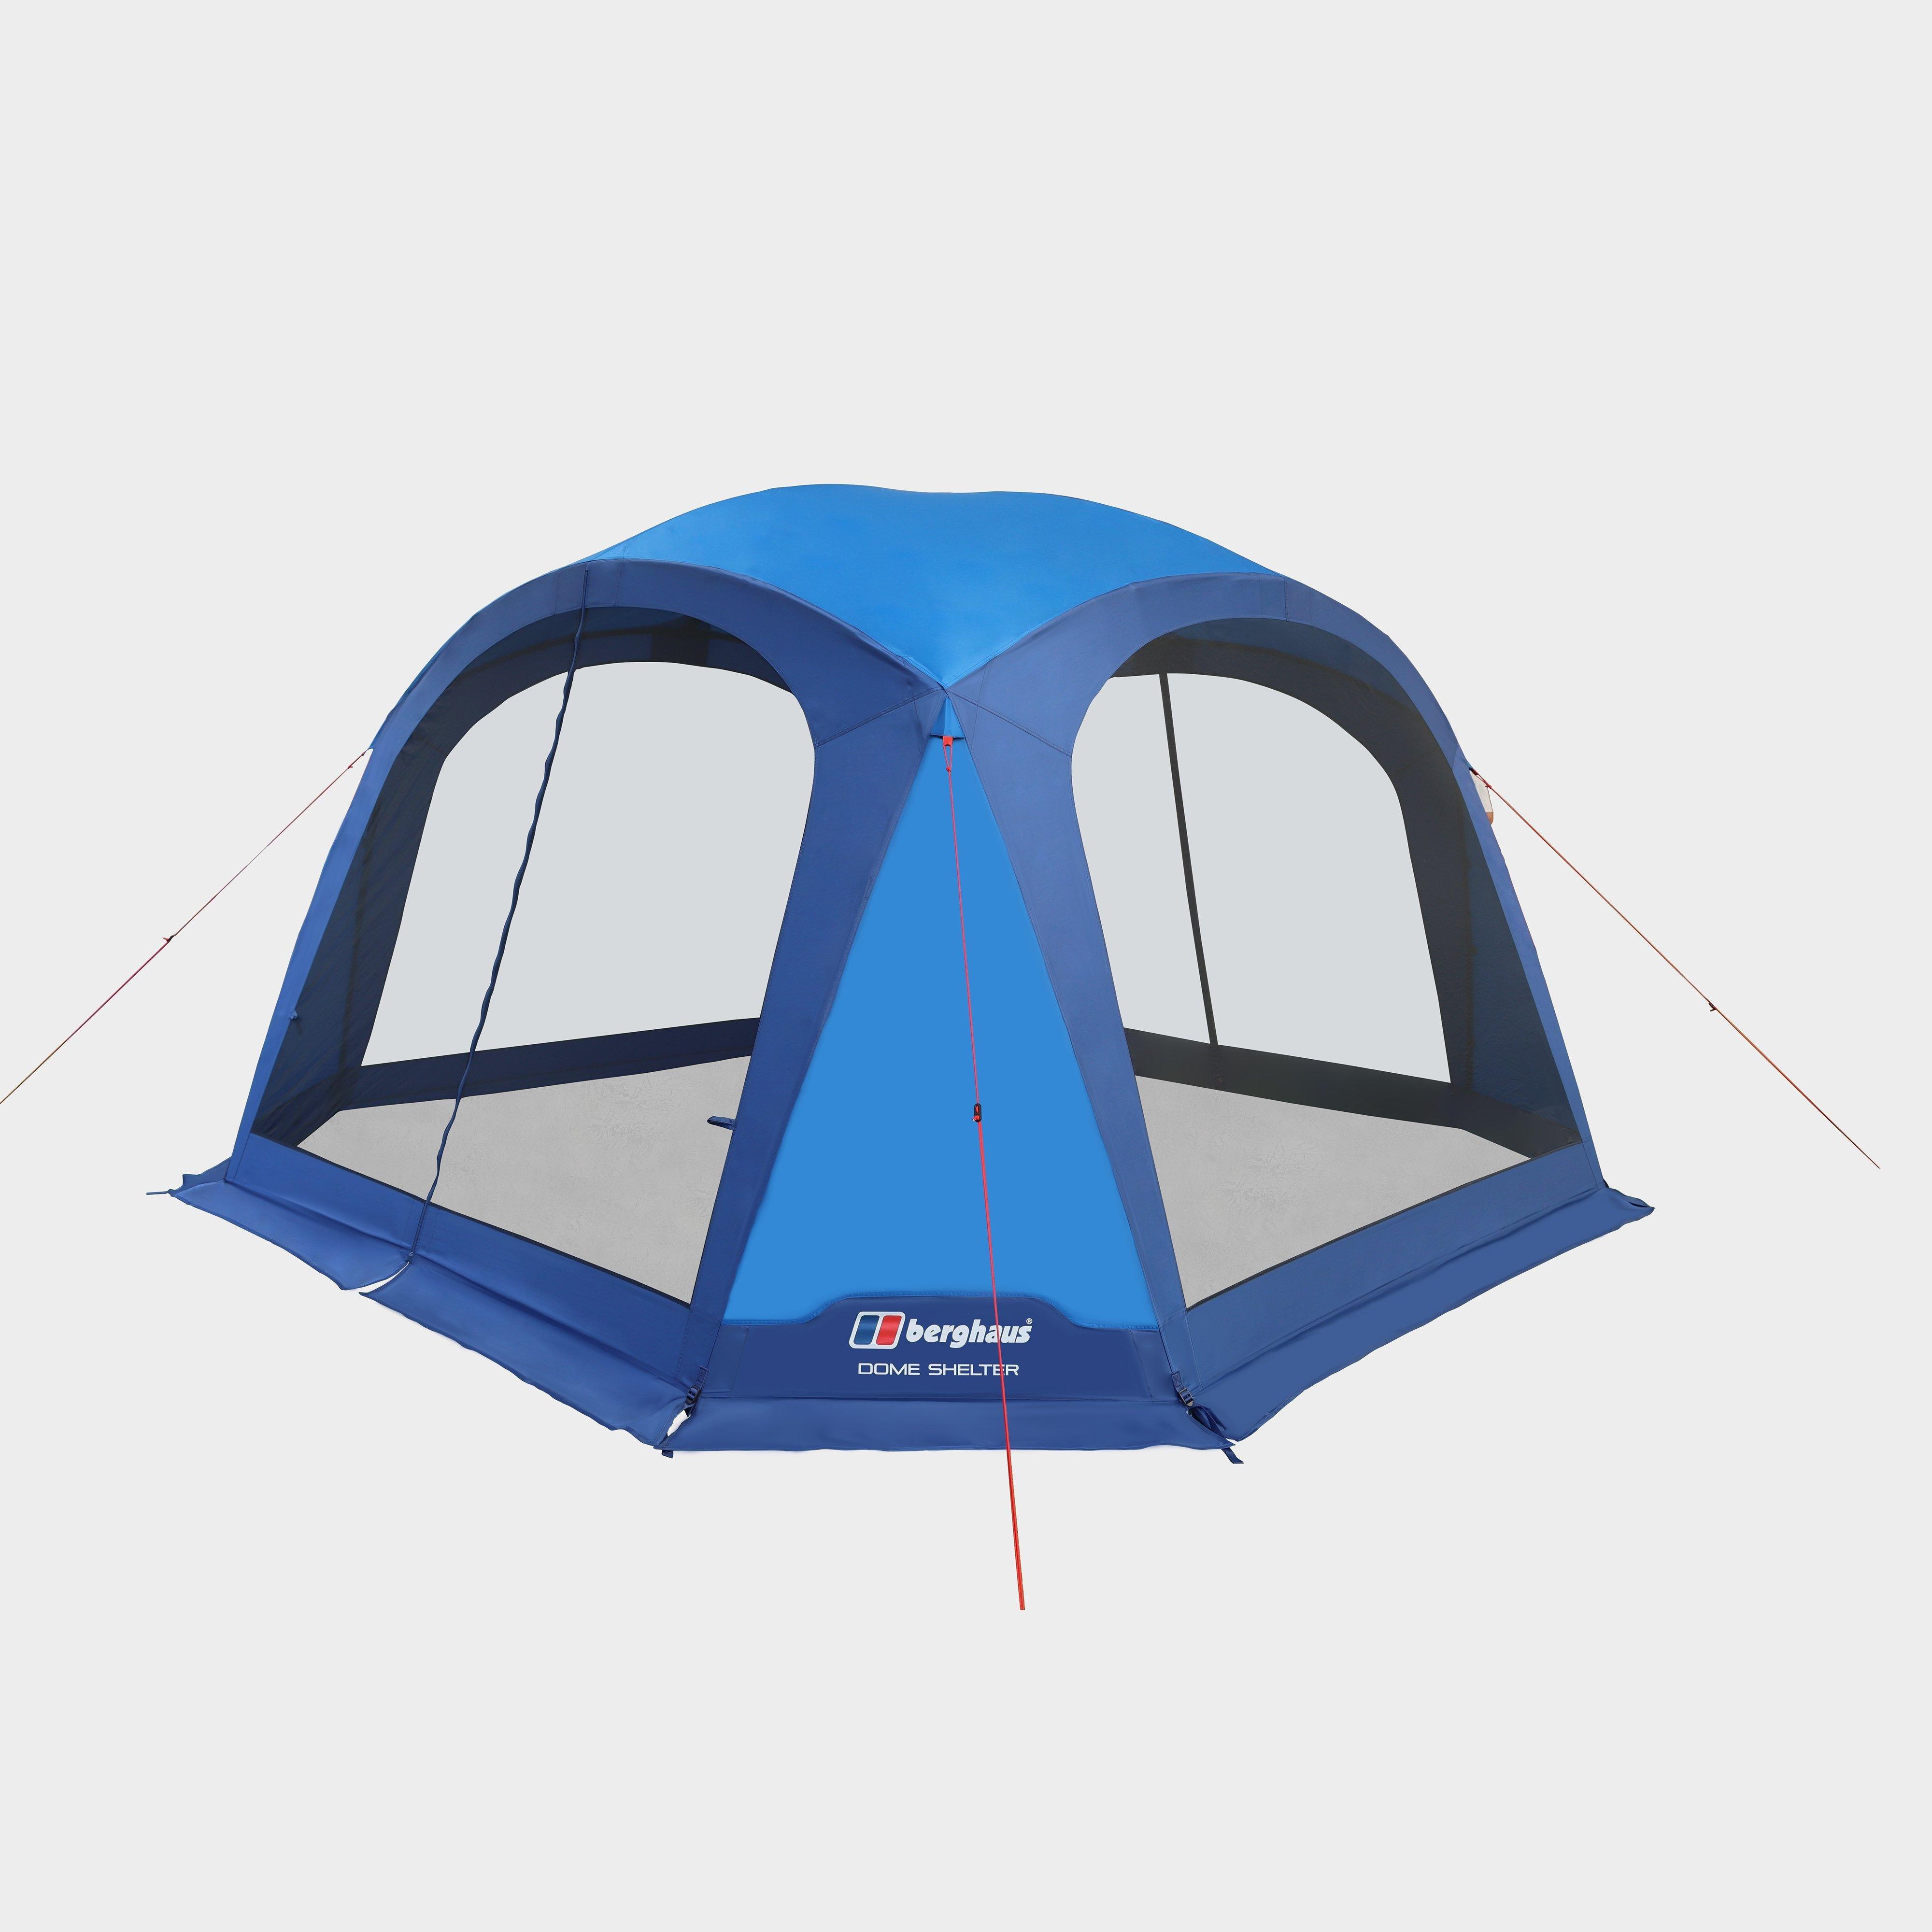  Berghaus Dome Shelter, Blue